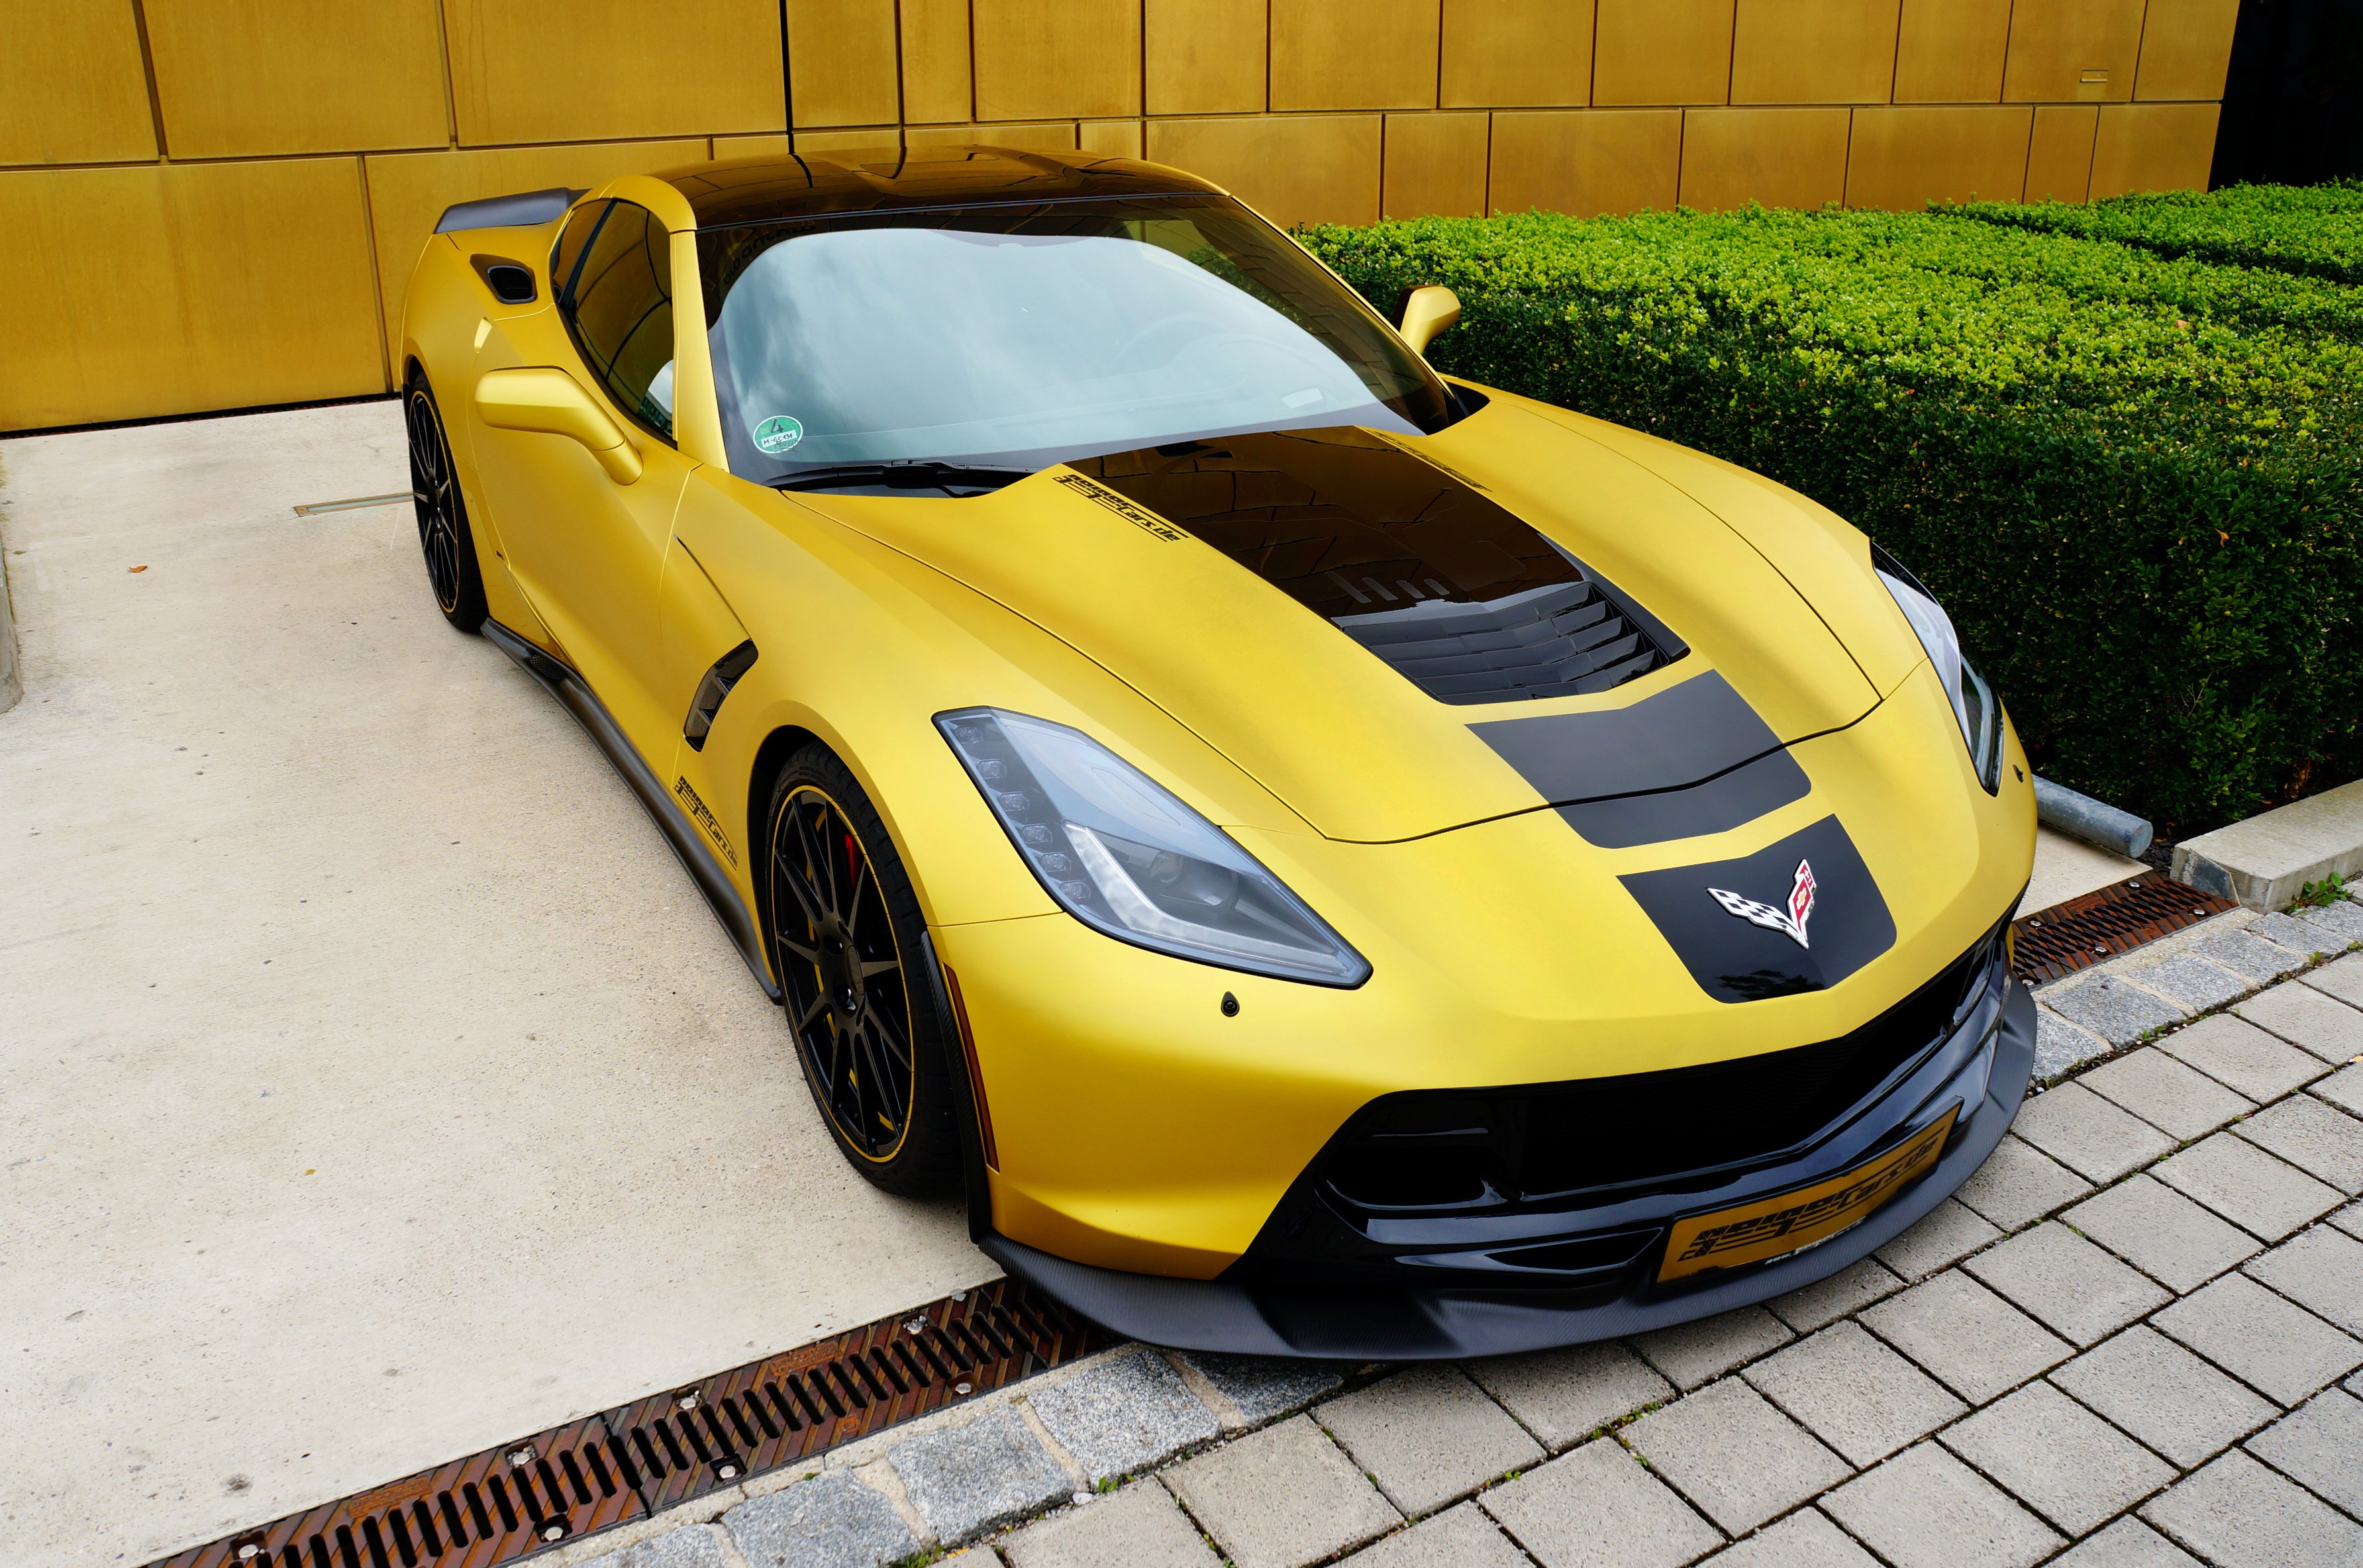 2014, Geiger, Chevrolet, Corvette, Stingray, Coupe, C 7, Tuning, Muscle, Supercar Wallpaper